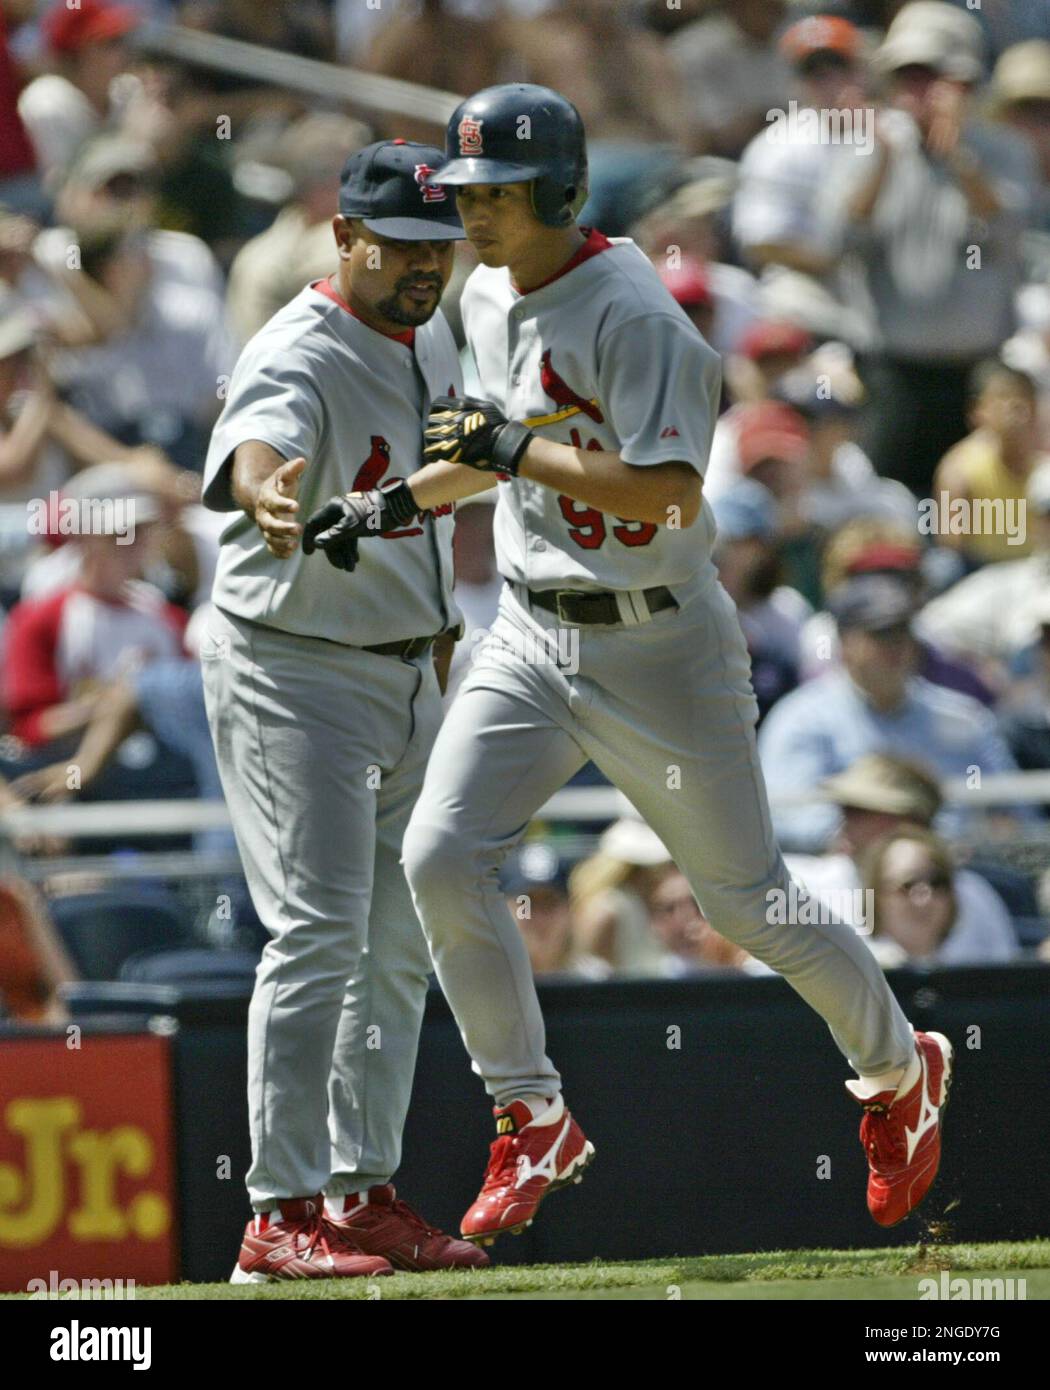 St. Louis Cardinals' So Taguchi is congratulated by third base